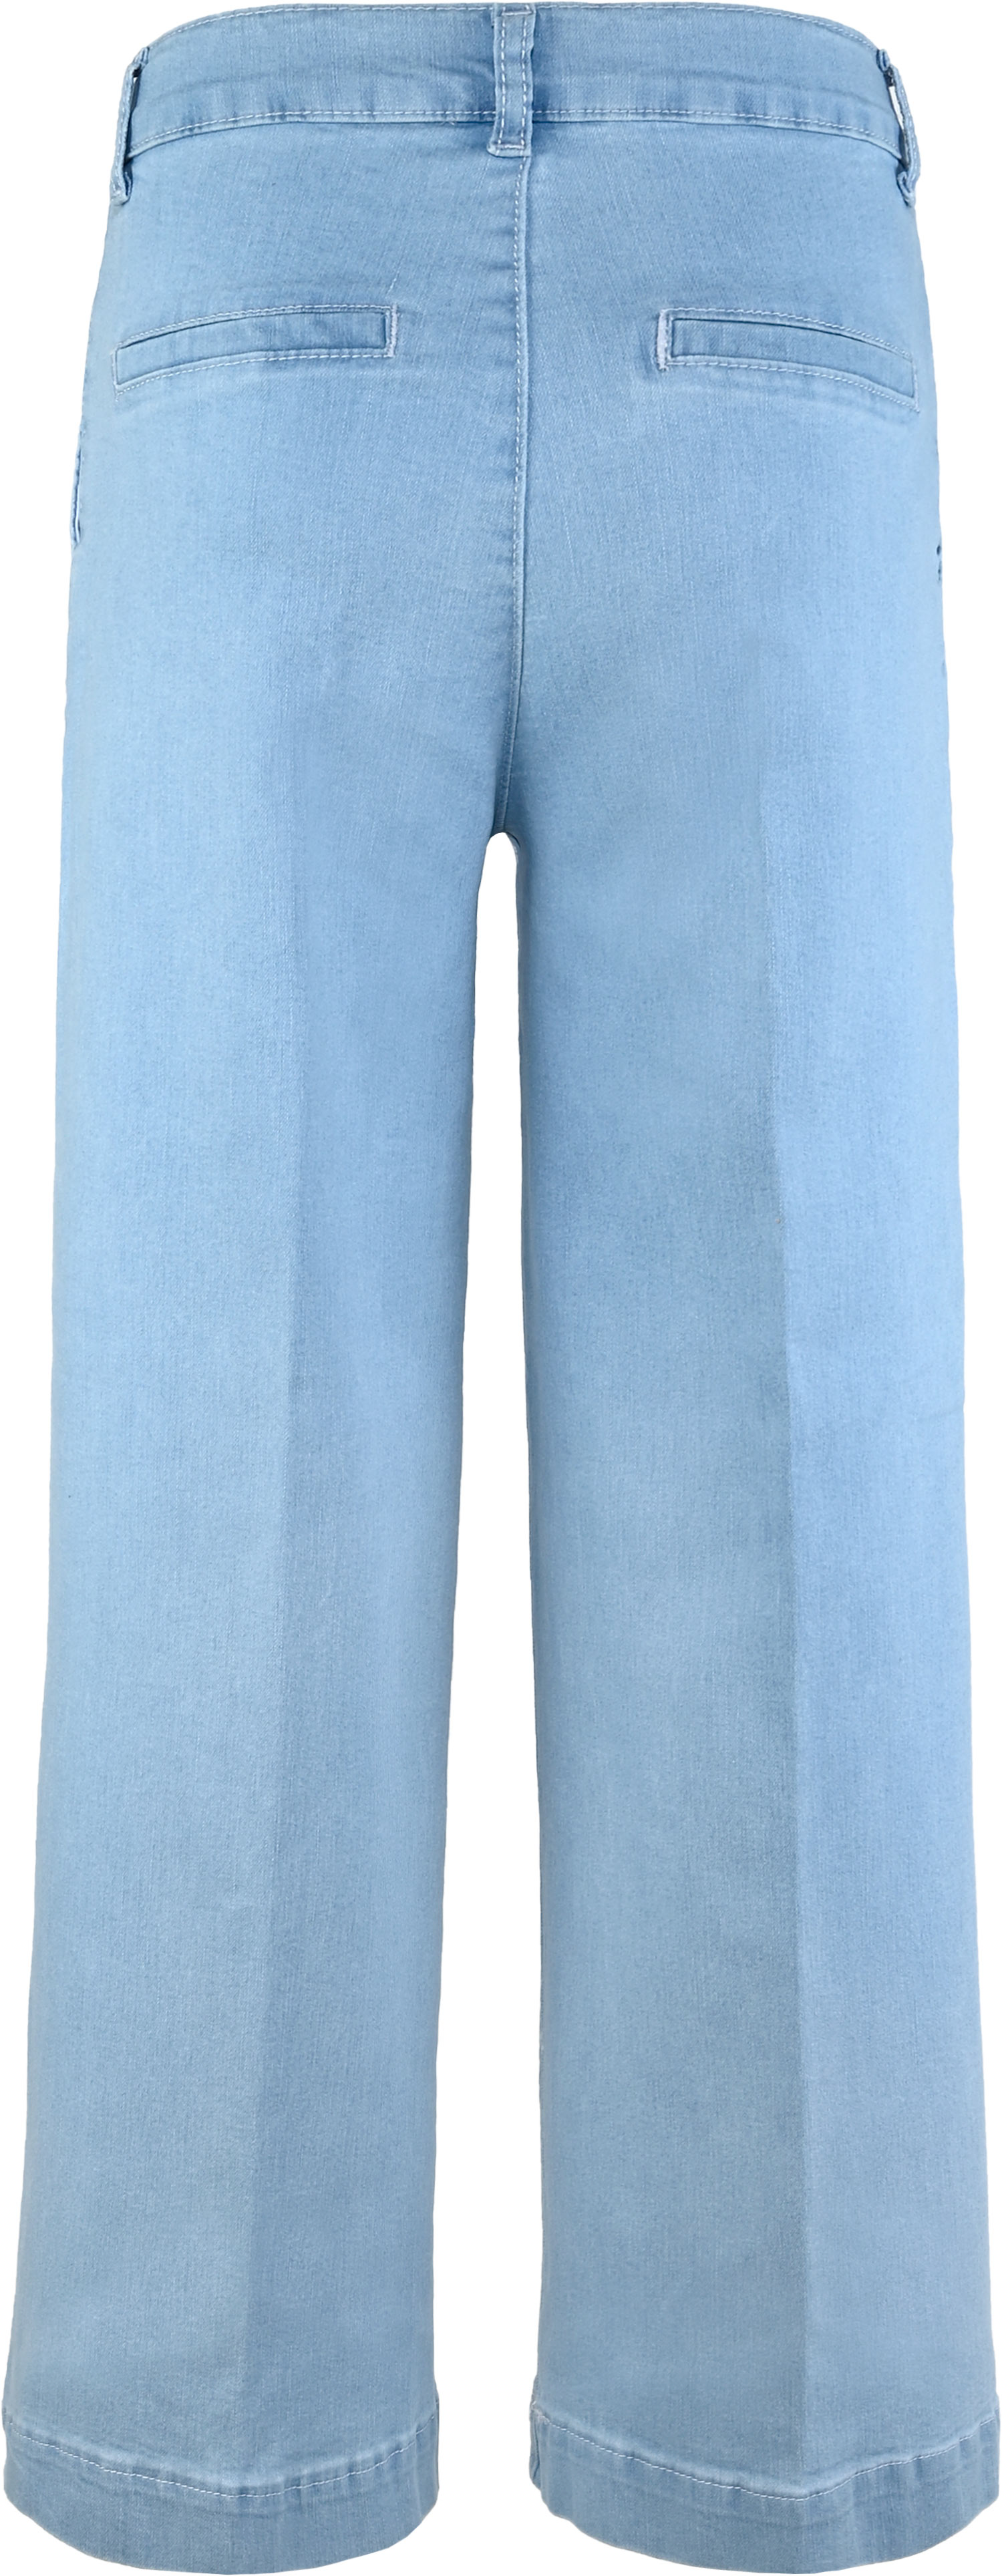 1376-Girls Wide Leg Jeans available in Slim,Normal